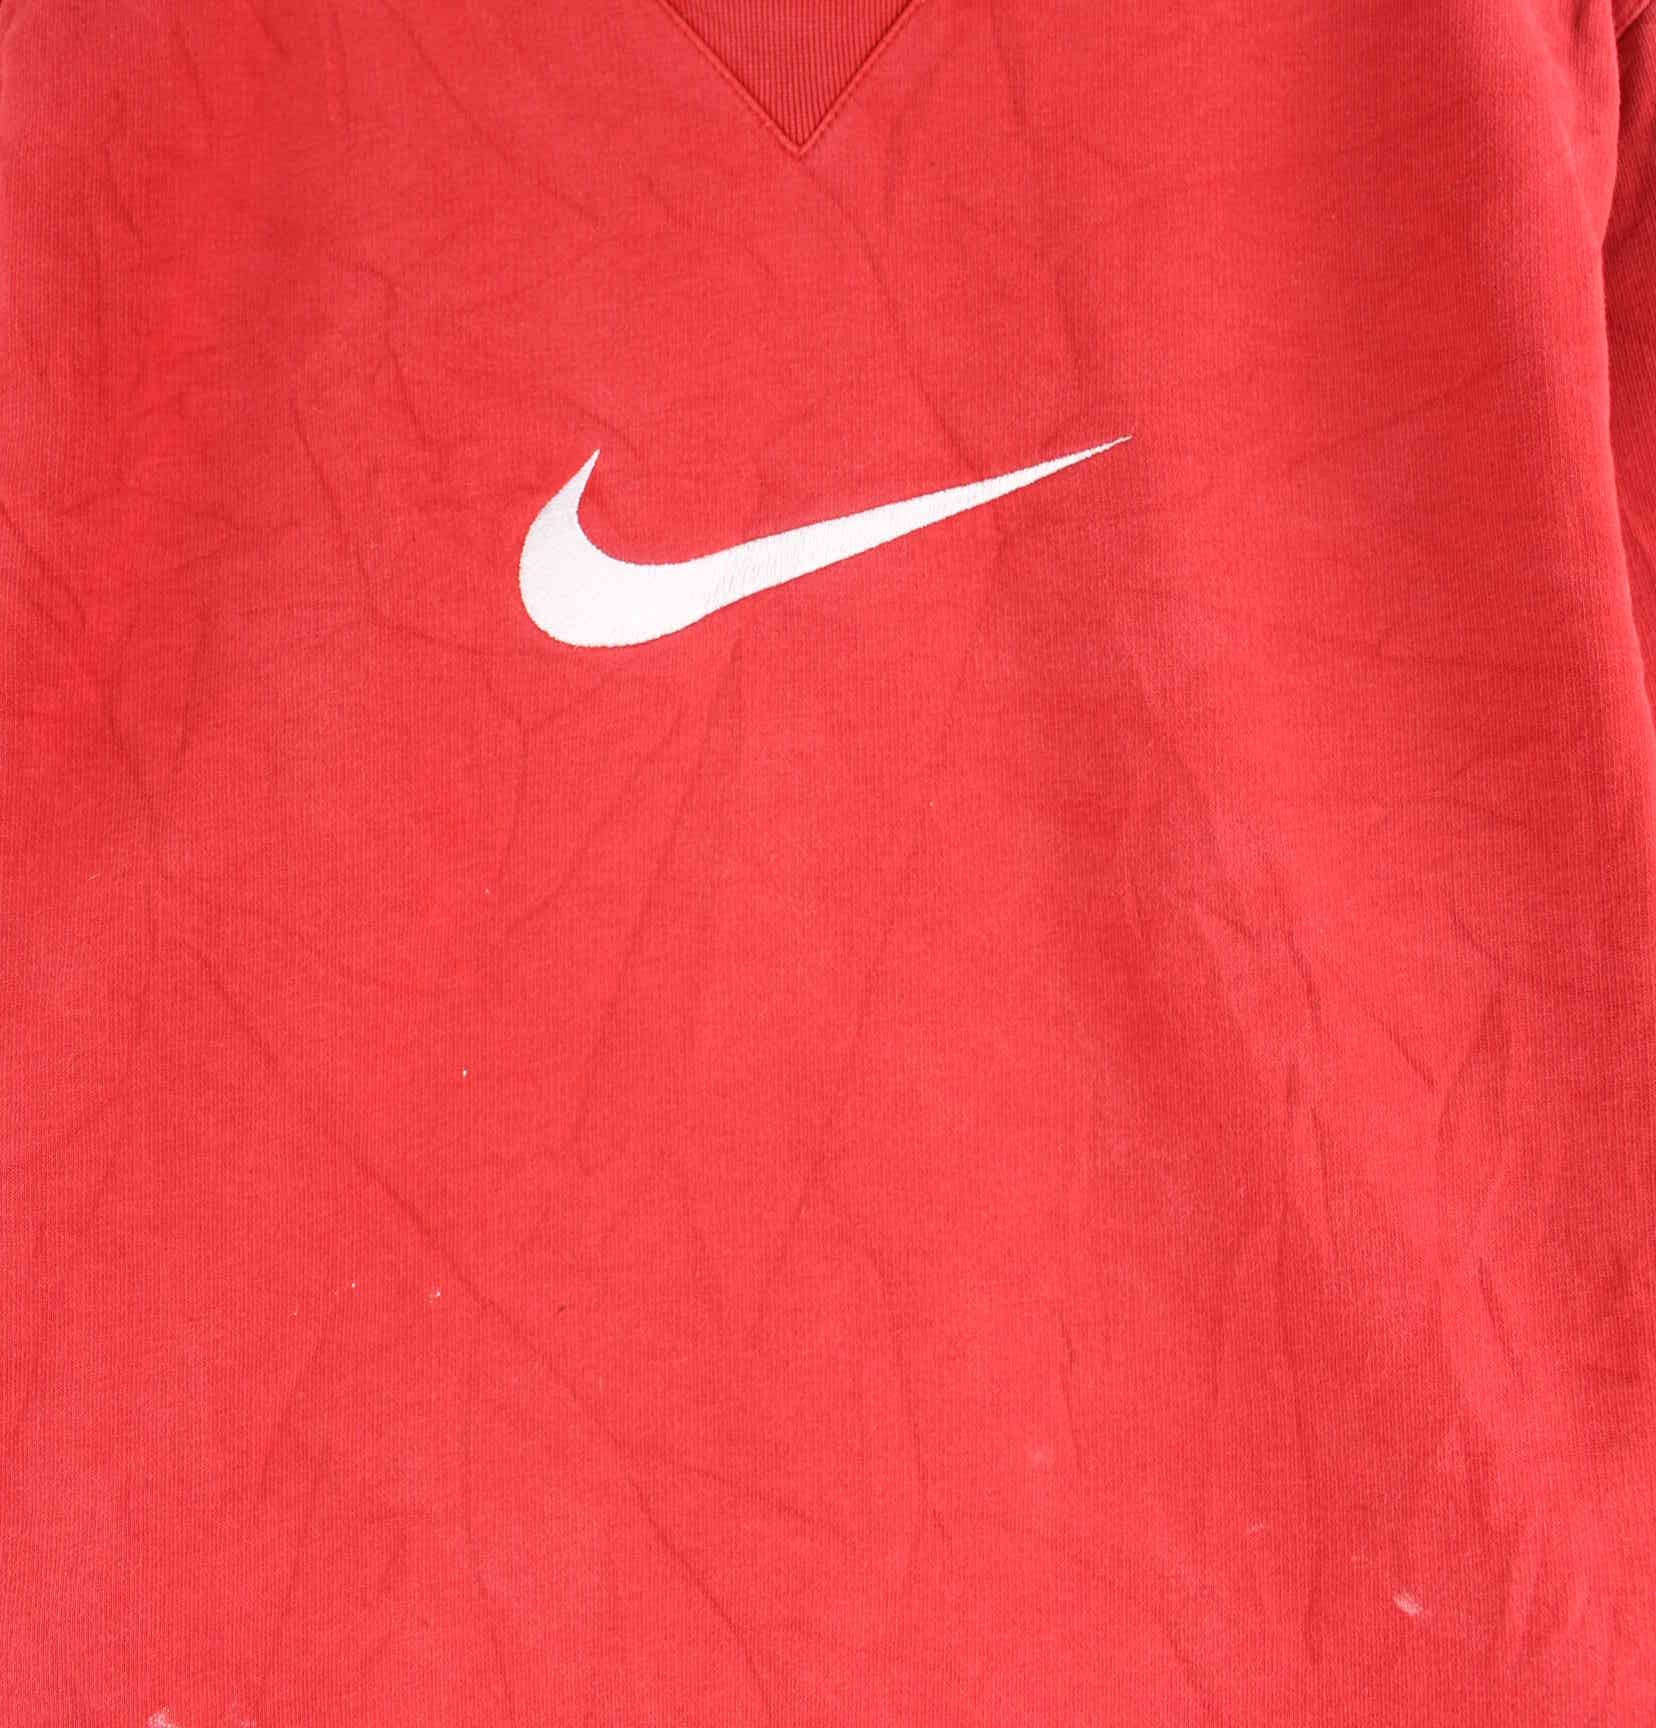 Nike 90s Vintage Big Swoosh Embroidered Sweater Rot S (detail image 1)